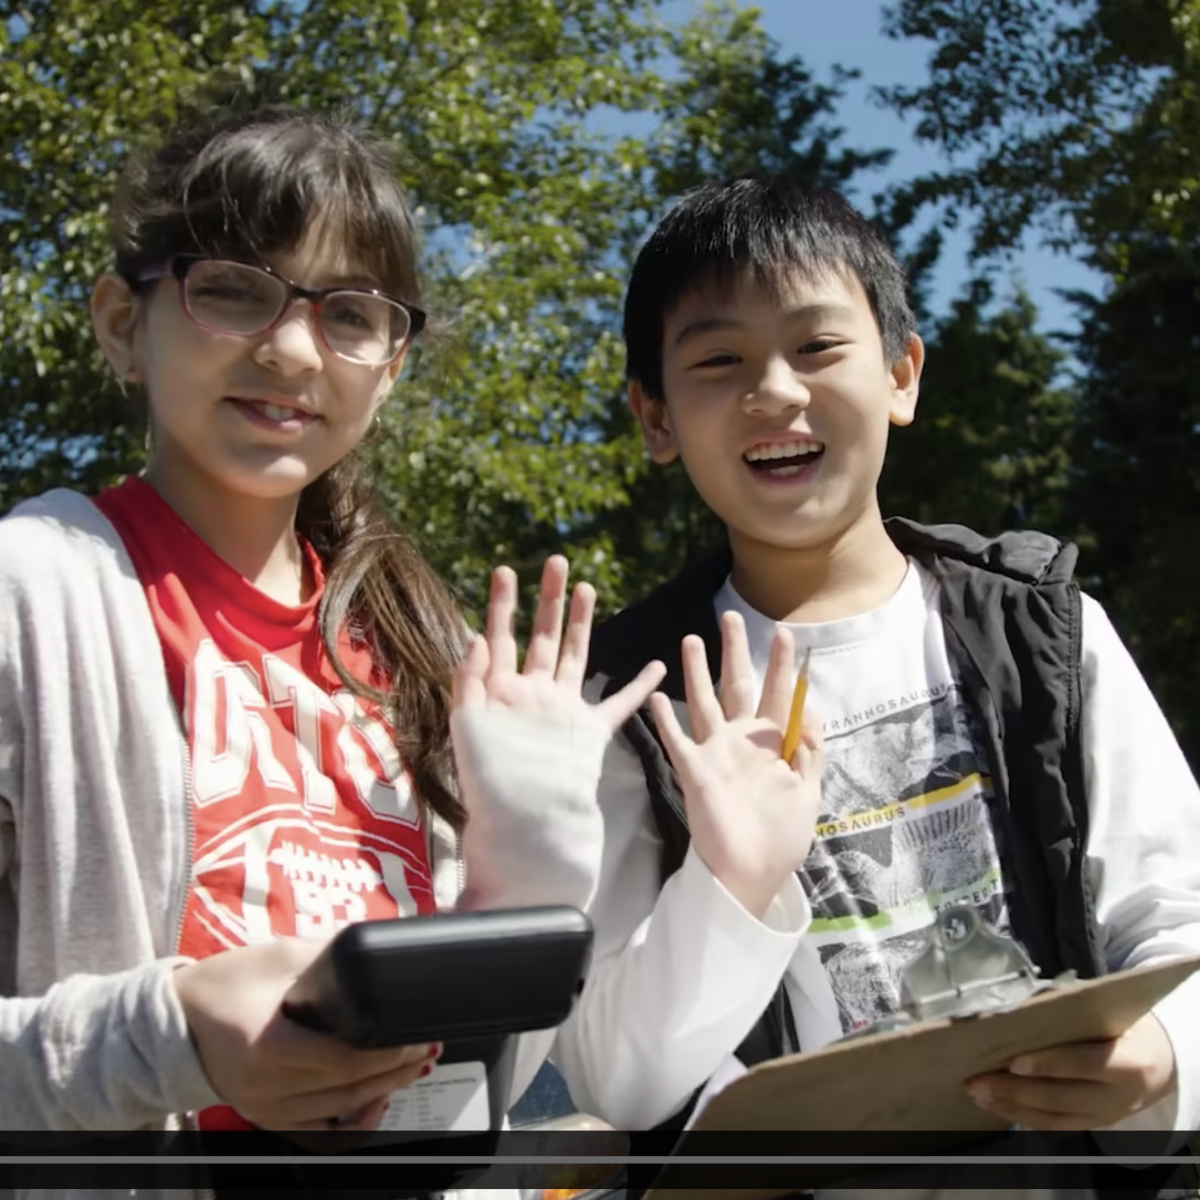 2 students look up to smile and wave at the camera. One is holding an air quality meter and the other is holding a clipbaord.